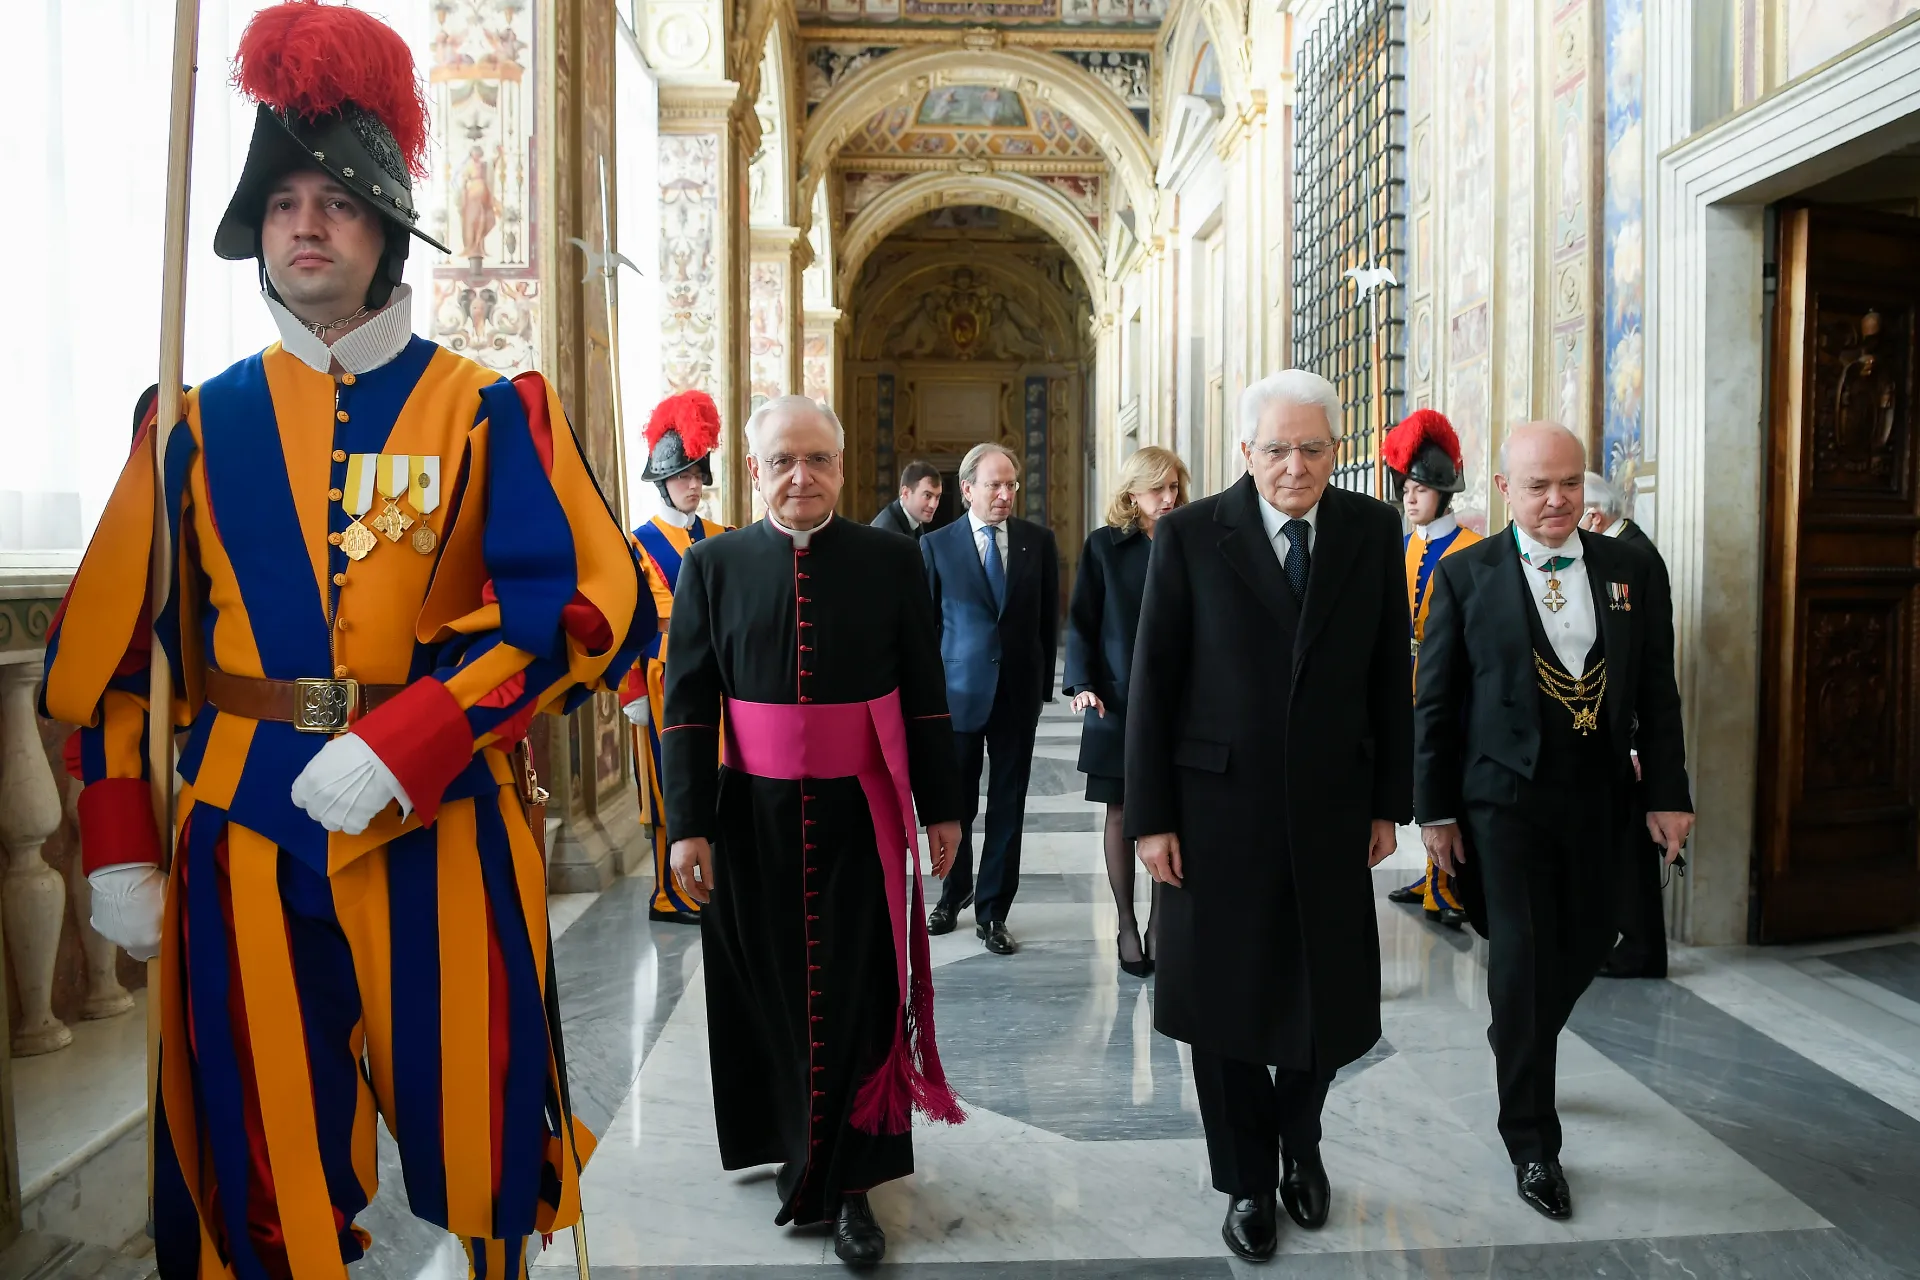 President Sergio Mattarella enters the Vatican for an audience with Pope Francis on Dec. 16, 2021.?w=200&h=150